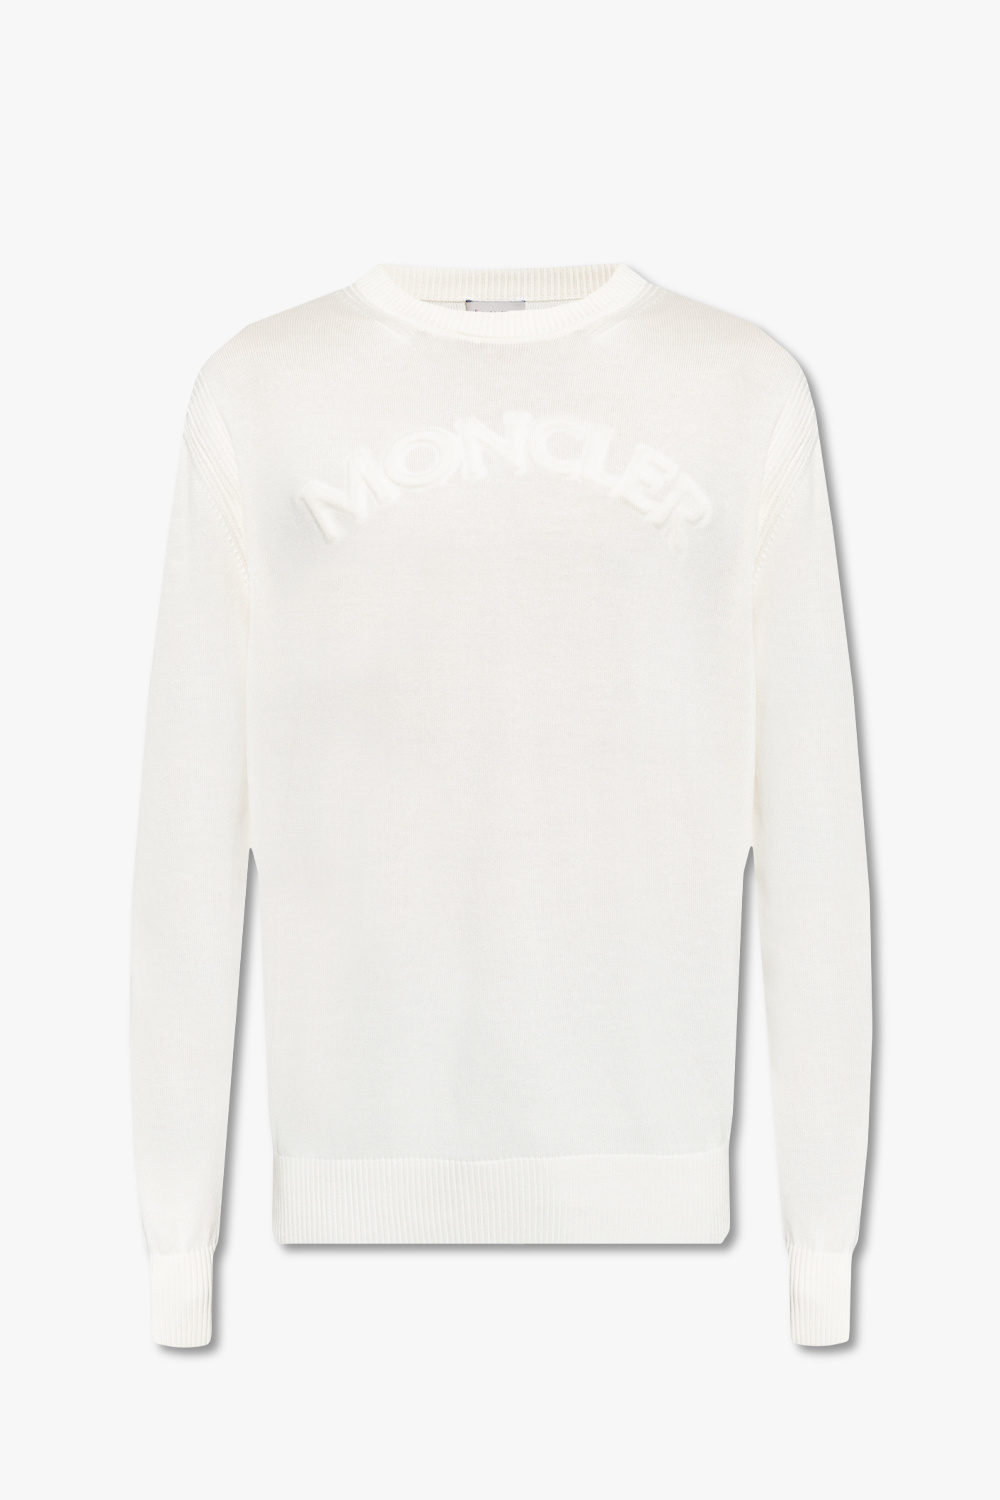 Moncler sweater zip-up with logo